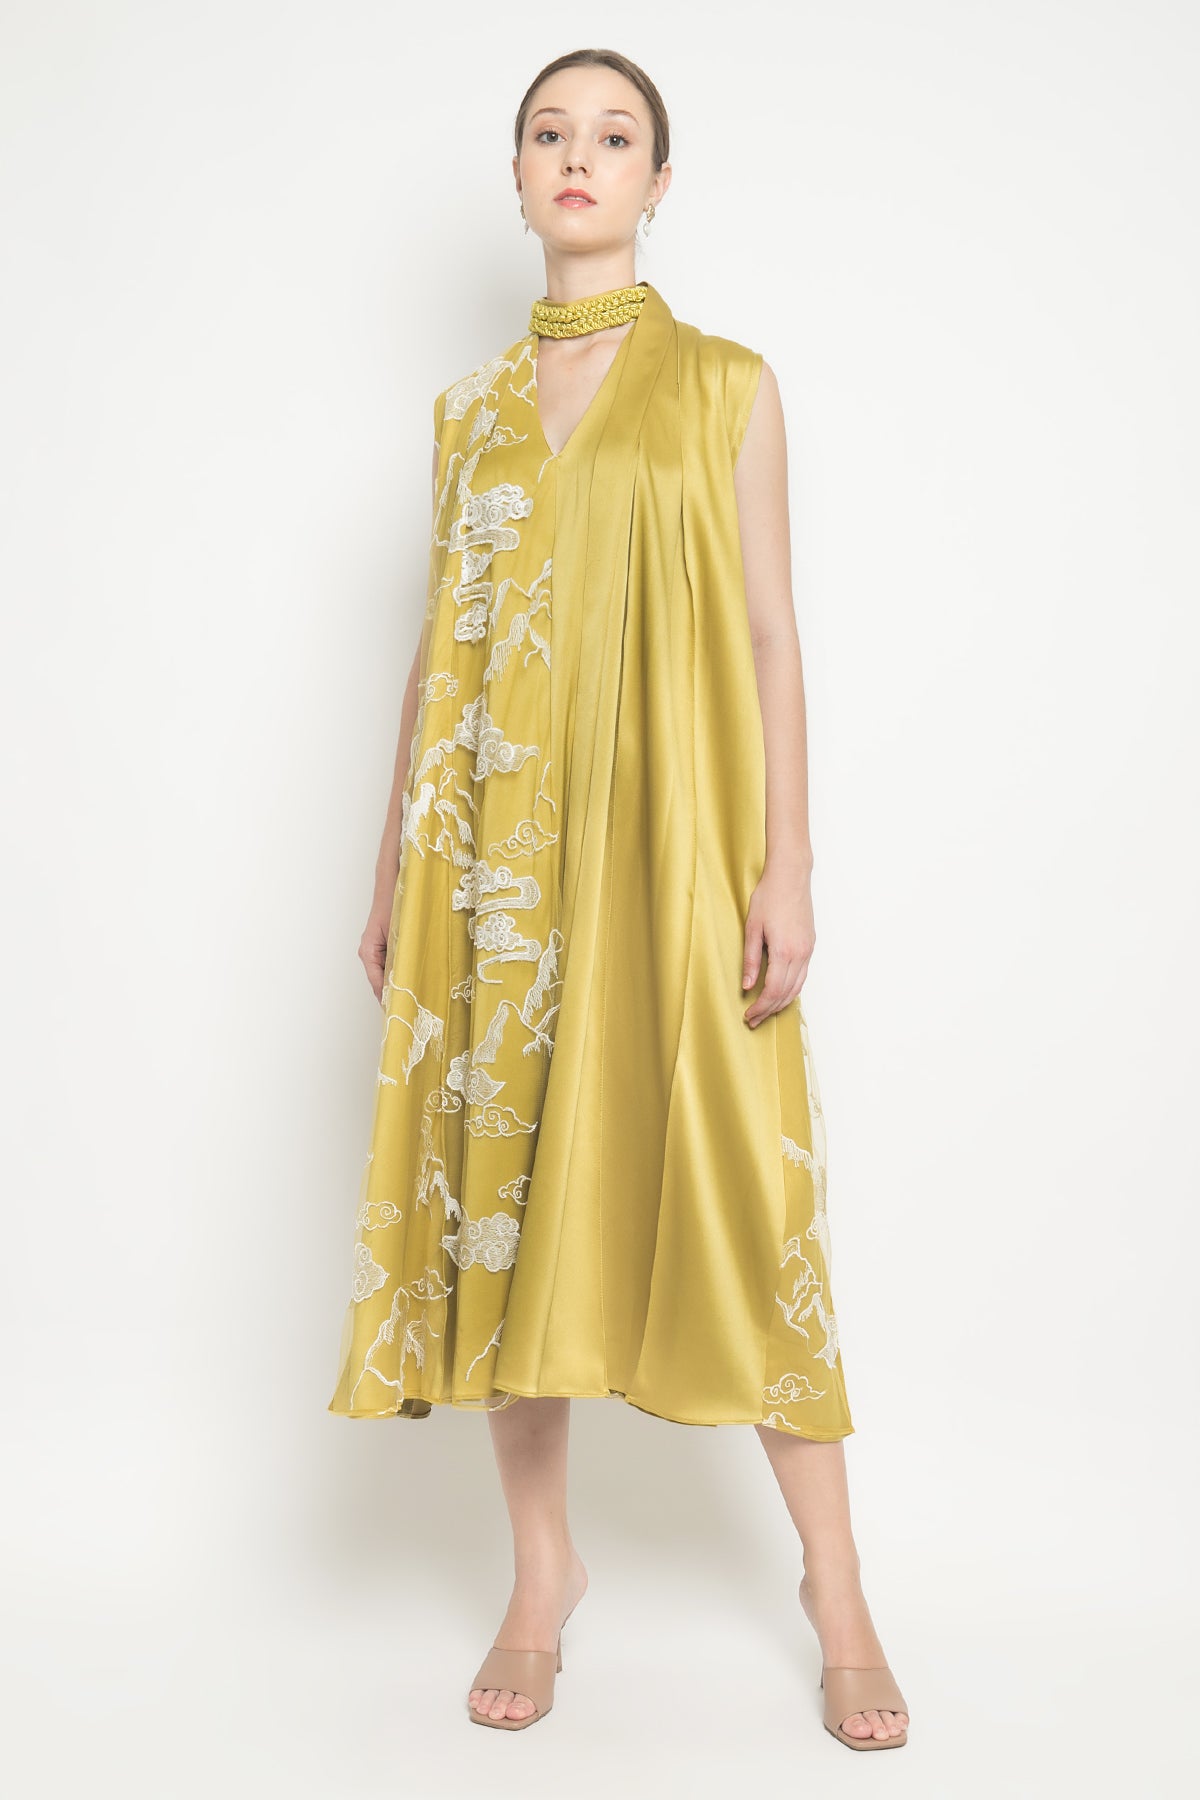 Sinergi Dress 03 in Chartreuse